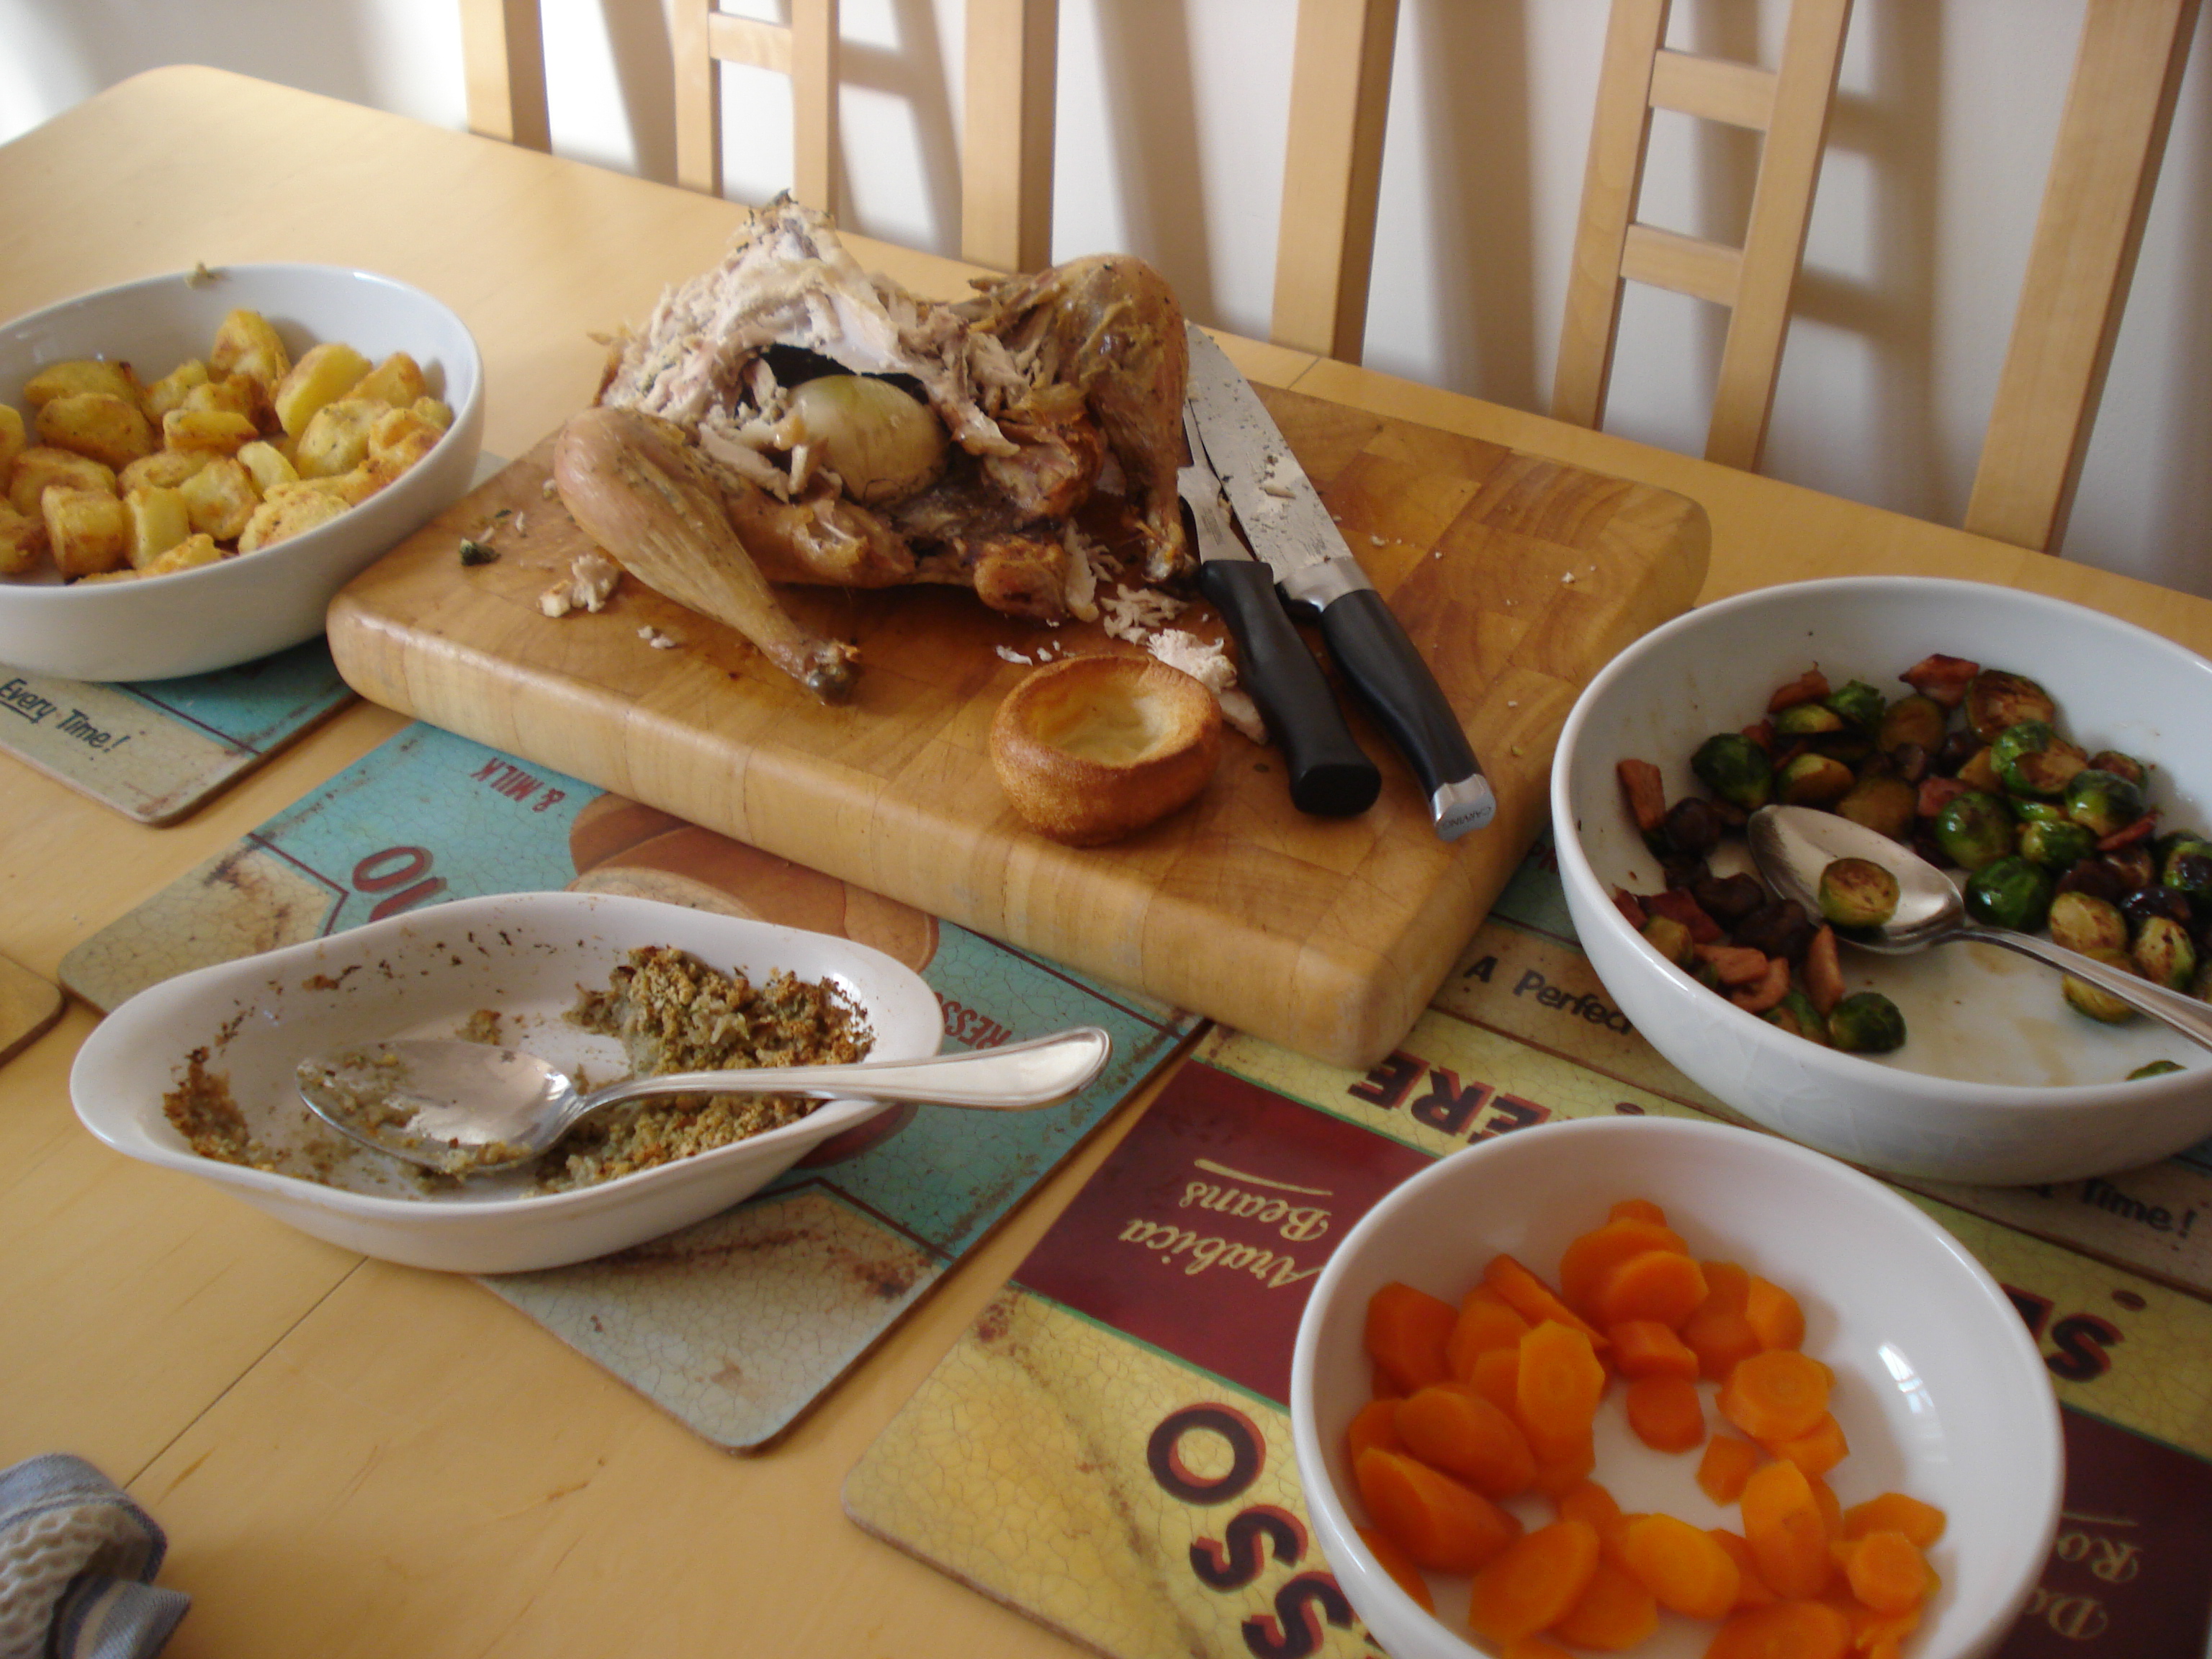 sunday roast chicken with roast potatoes, carrots and brussels sprouts